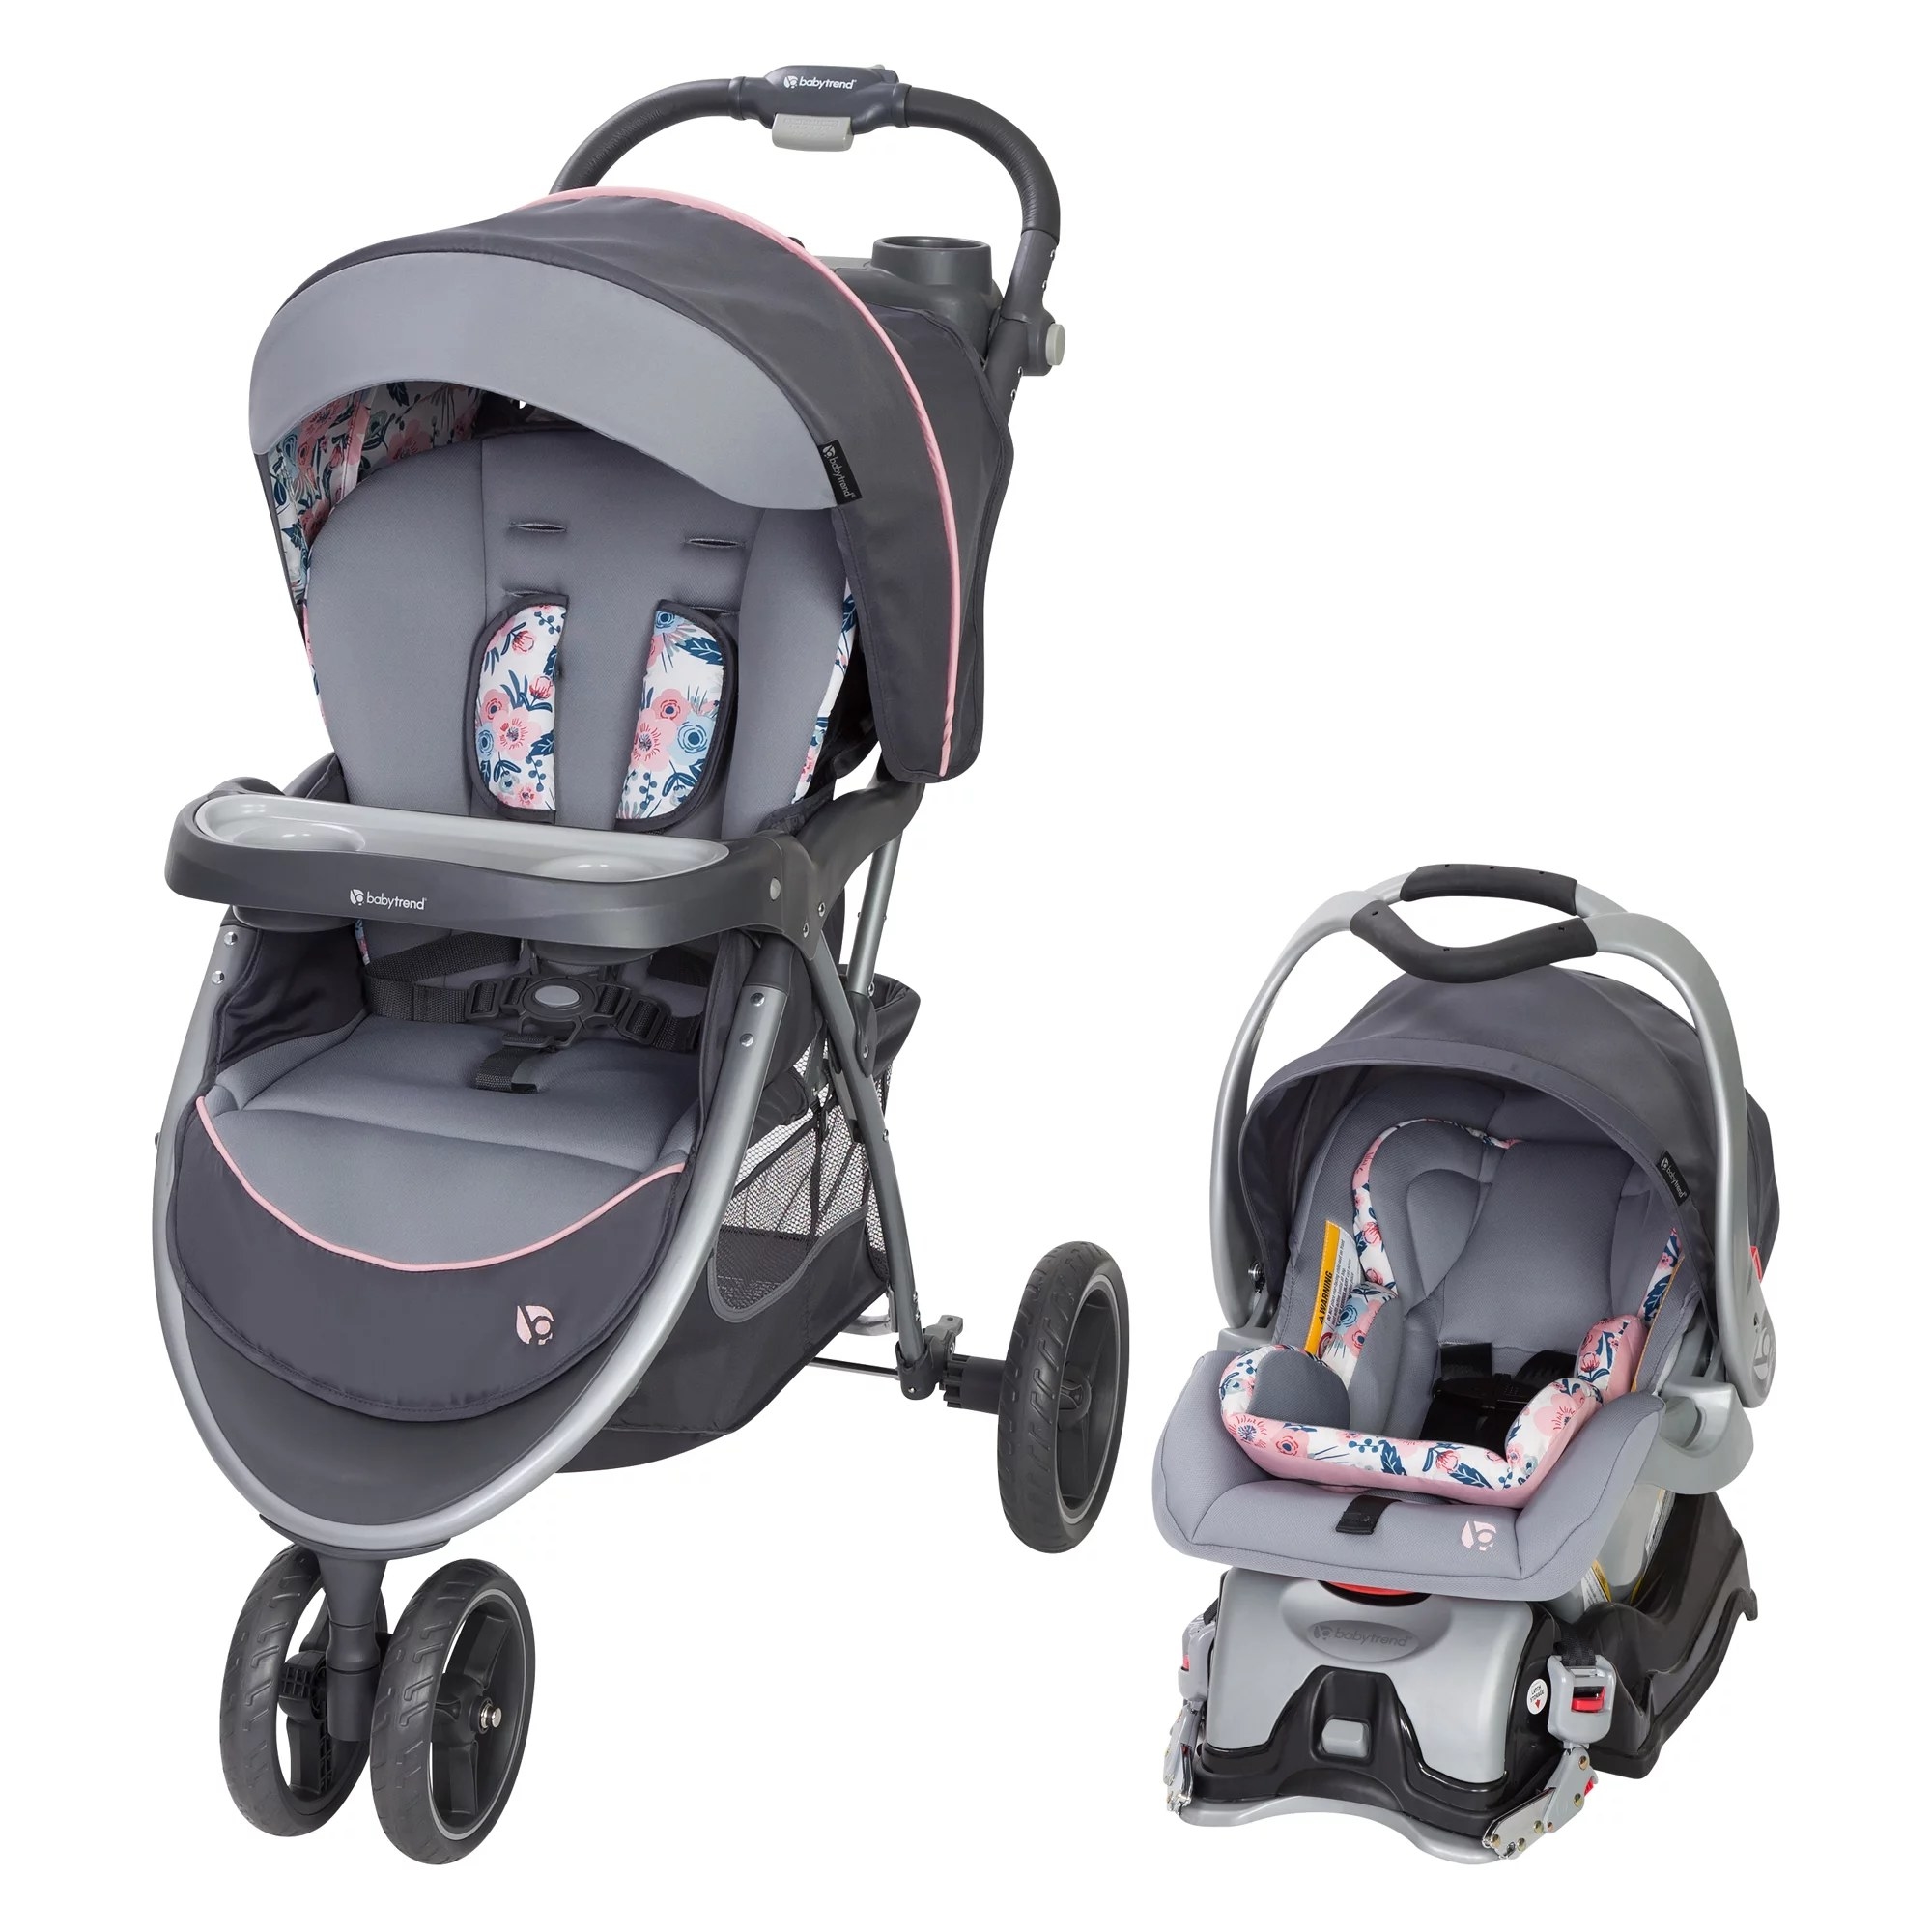 Grey and pink stroller and carseat